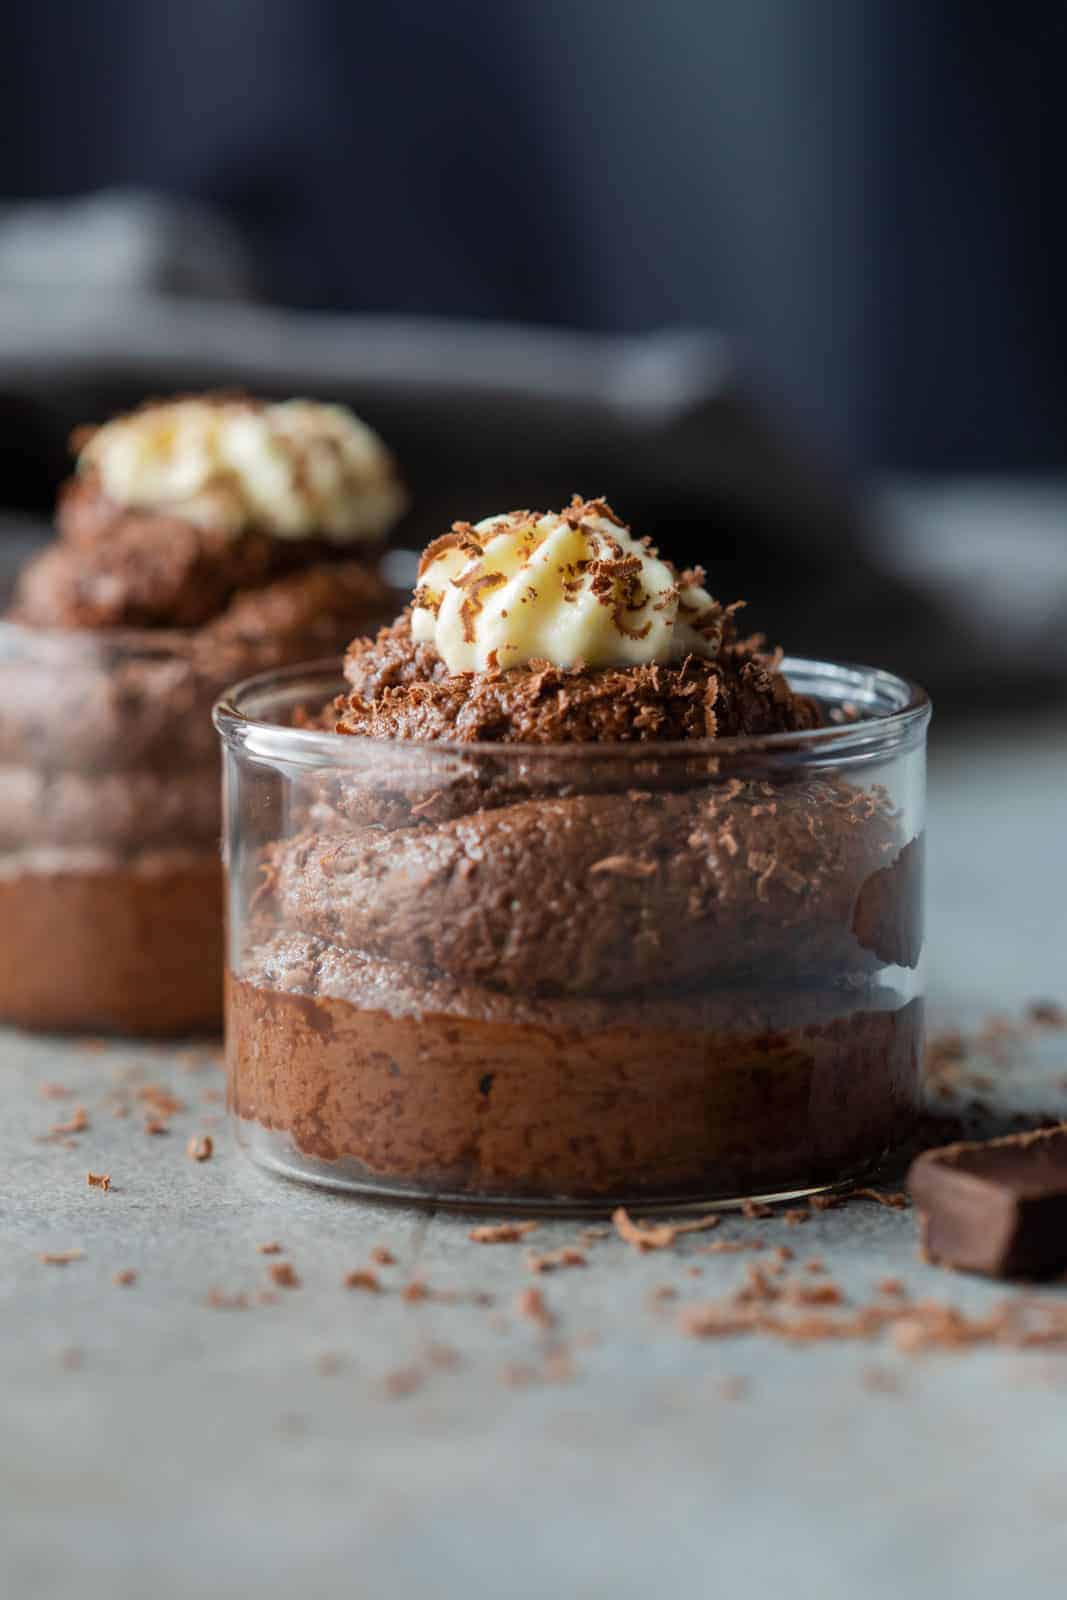 eggless chocolate mousse served in glass jars topped with whipped cream and a sprinkle of grated chocolate